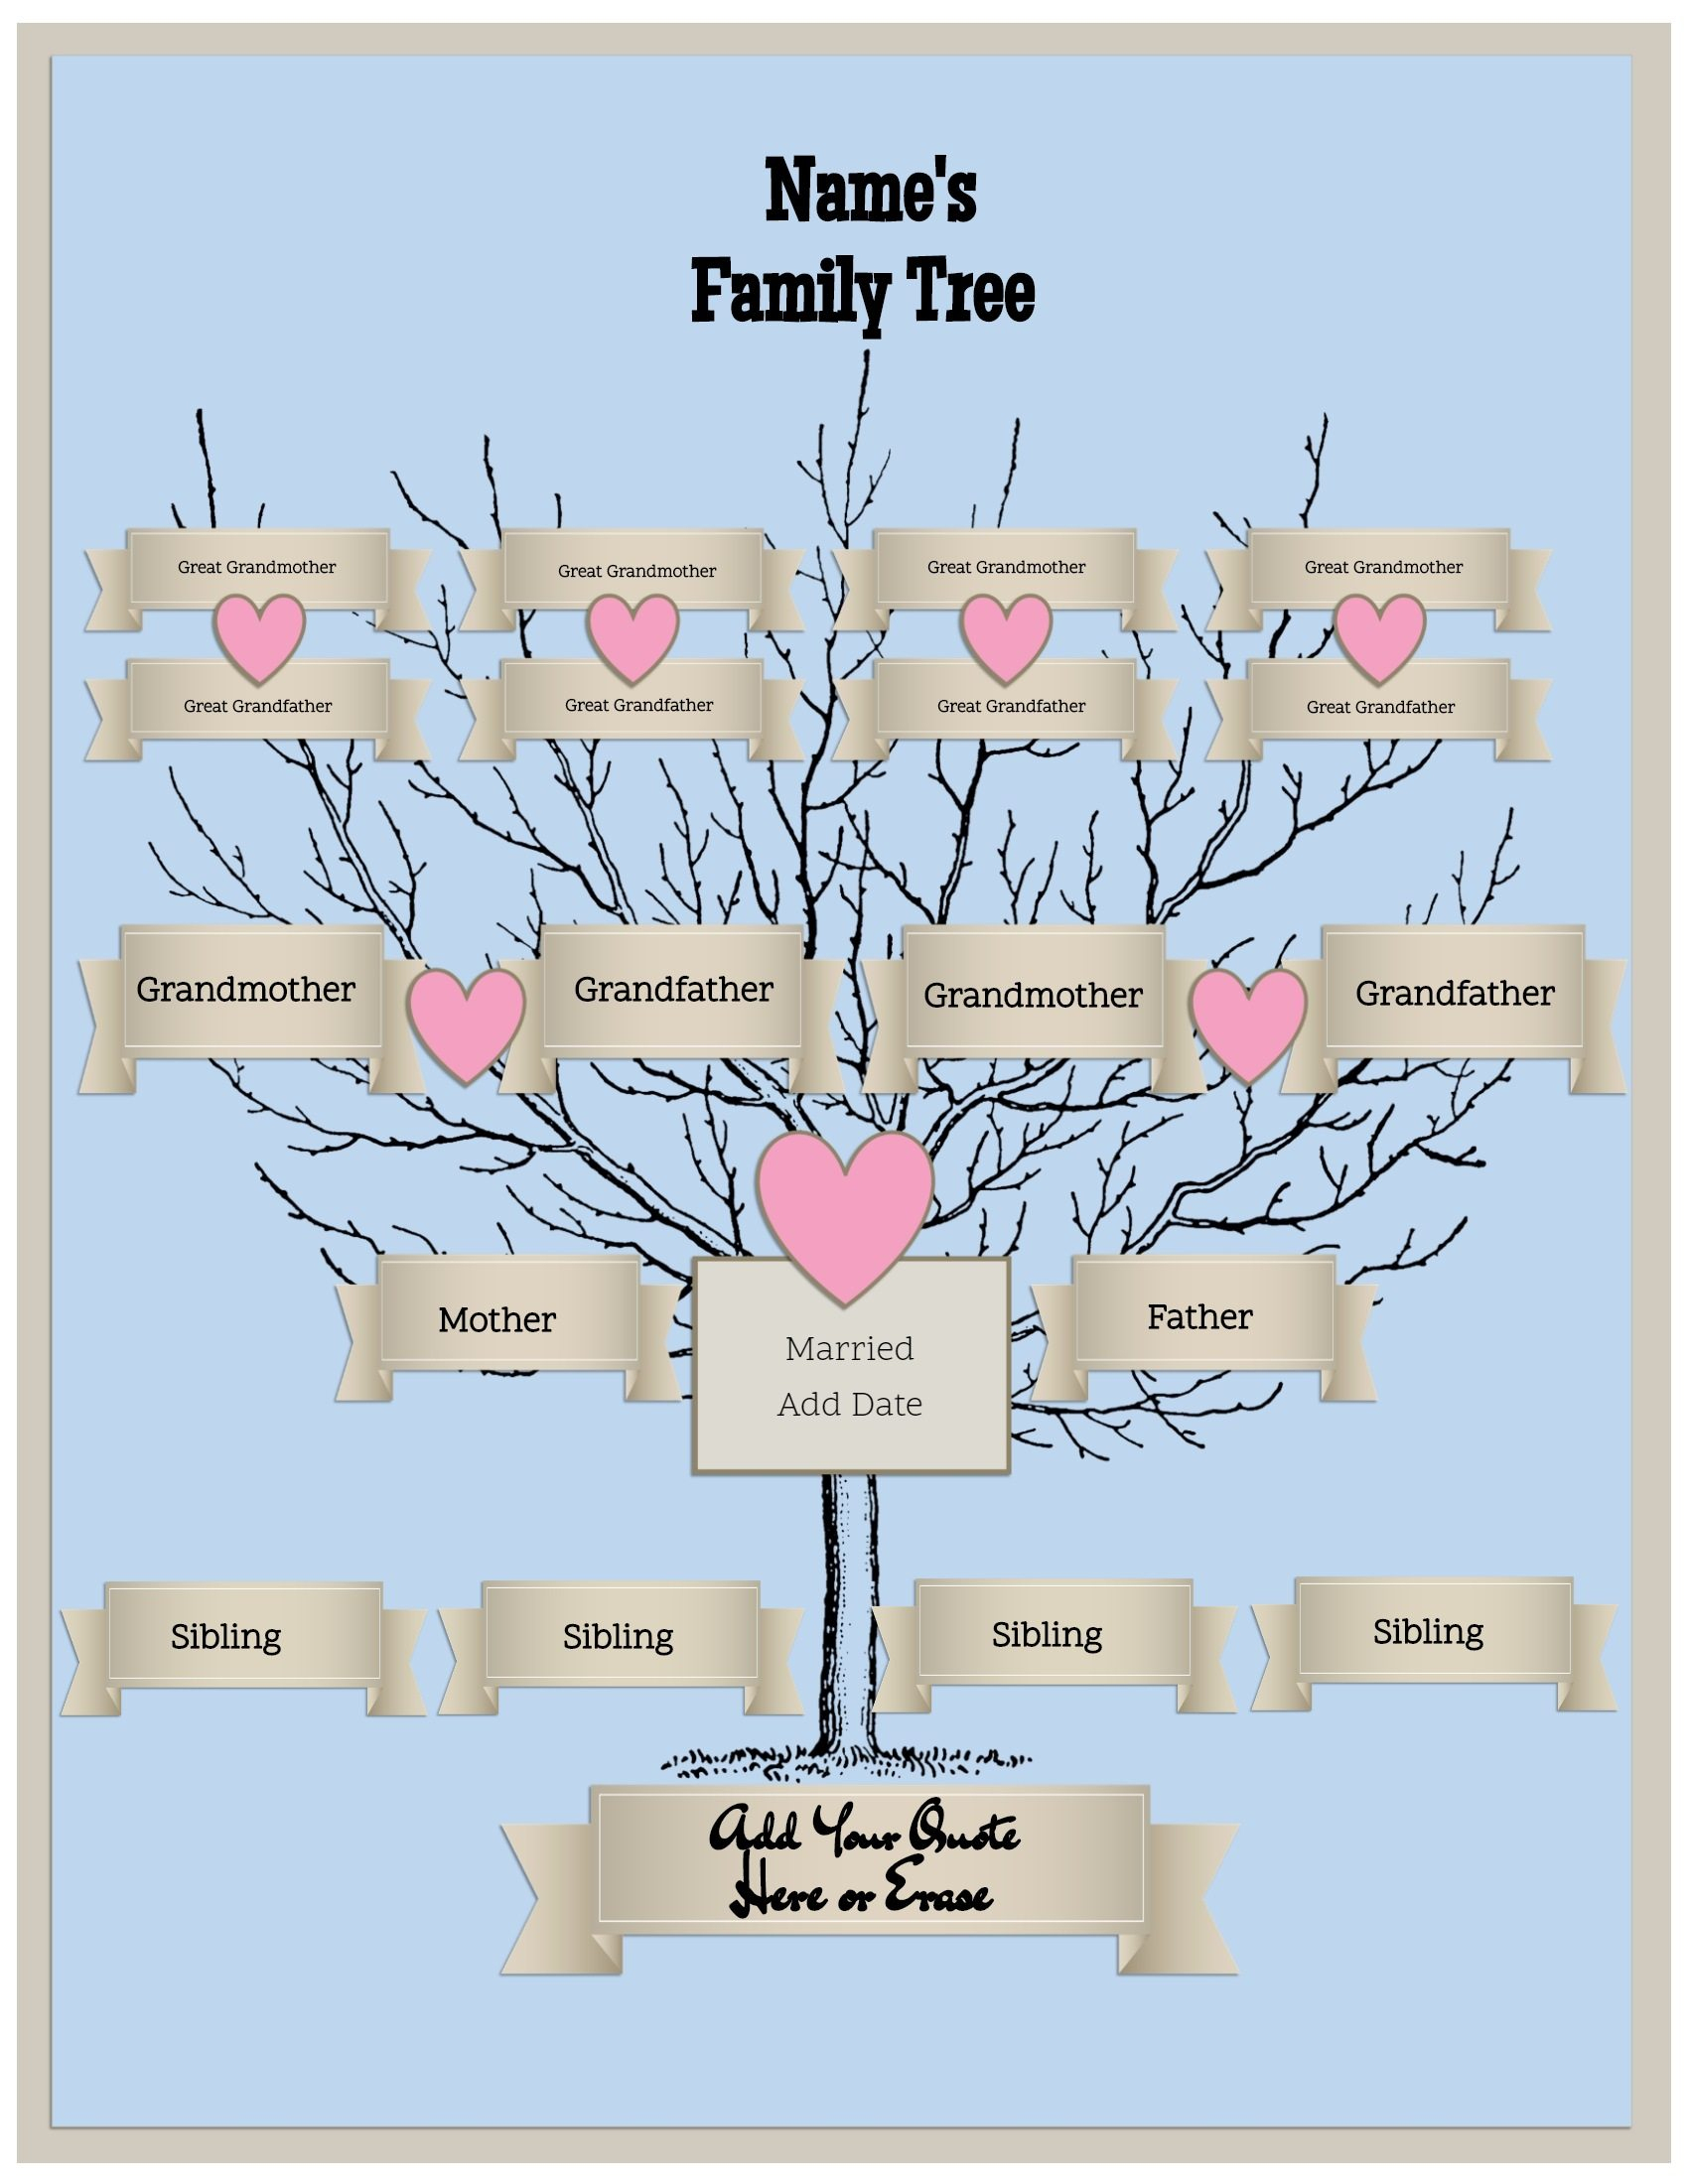 4 Generation Family Tree Template Free To Customize &amp;amp; Print - Free Printable Family Tree Template 4 Generations